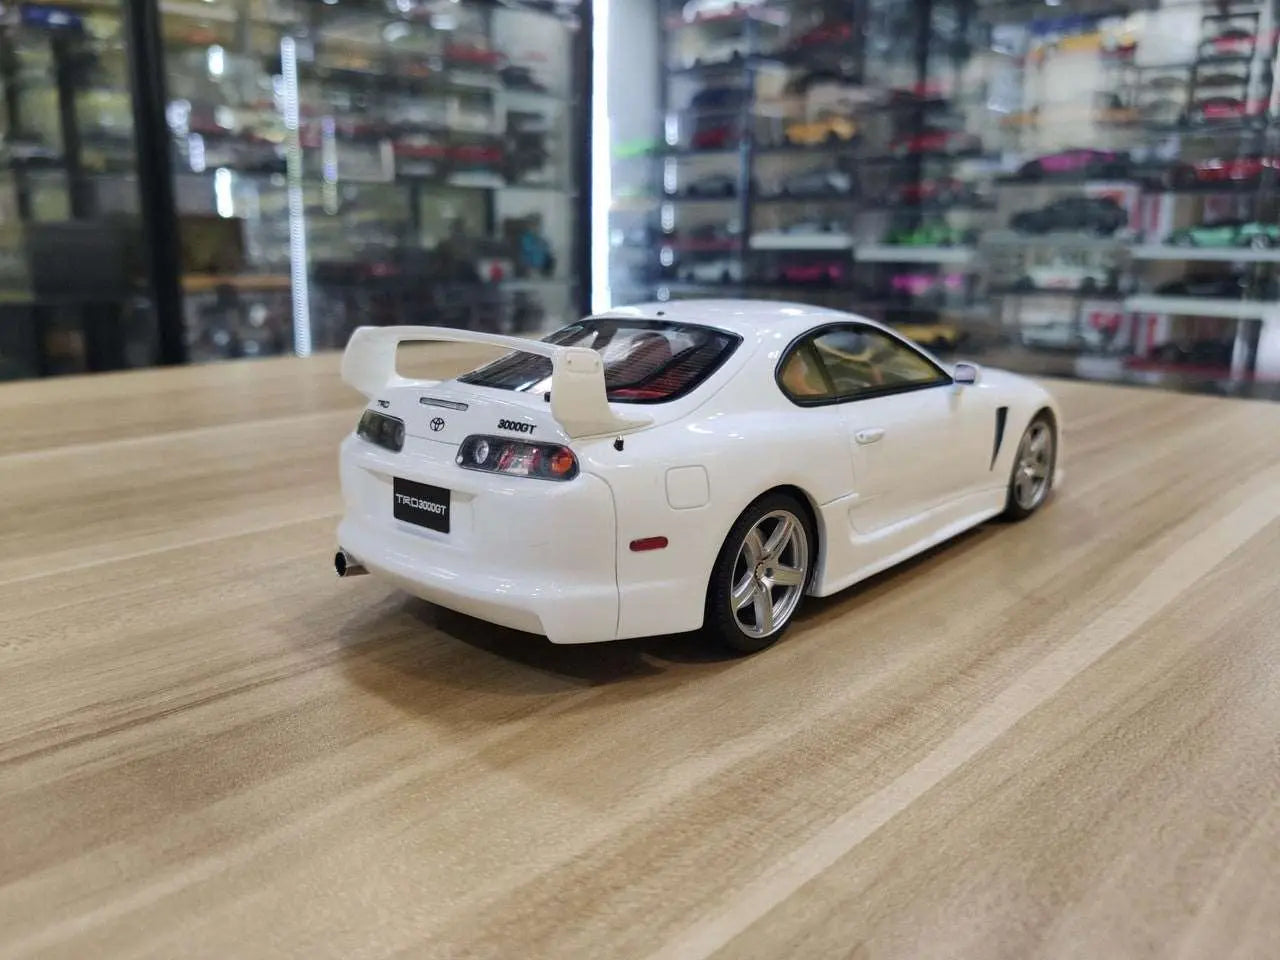 Toyota Supra TRD 3000GT 1:18 Scale | One Model Left!